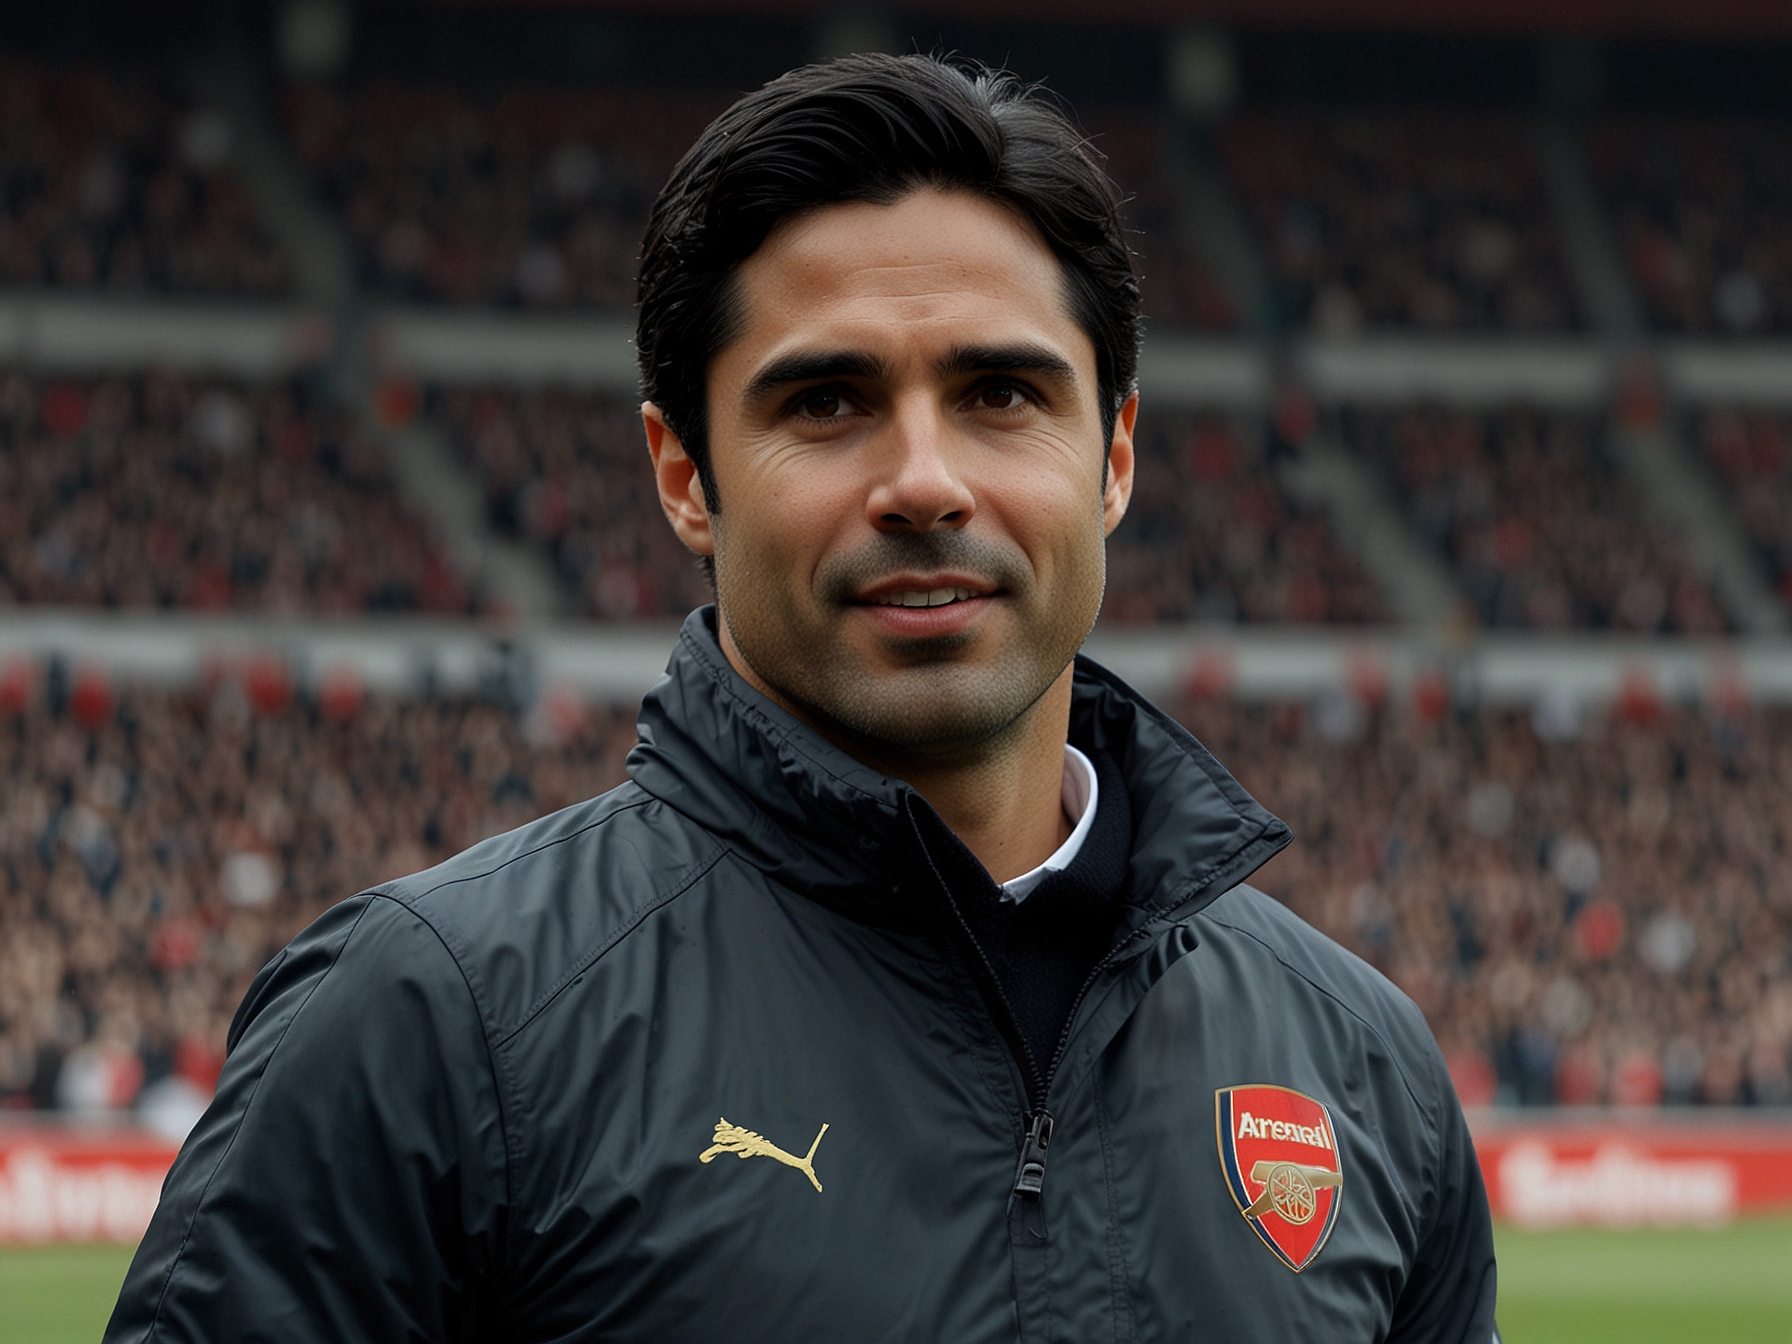 Arsenal manager Mikel Arteta, known for nurturing young talent, gives a thumbs-up during a match. Ferguson's attributes and potential align well with Arteta’s tactical setup.